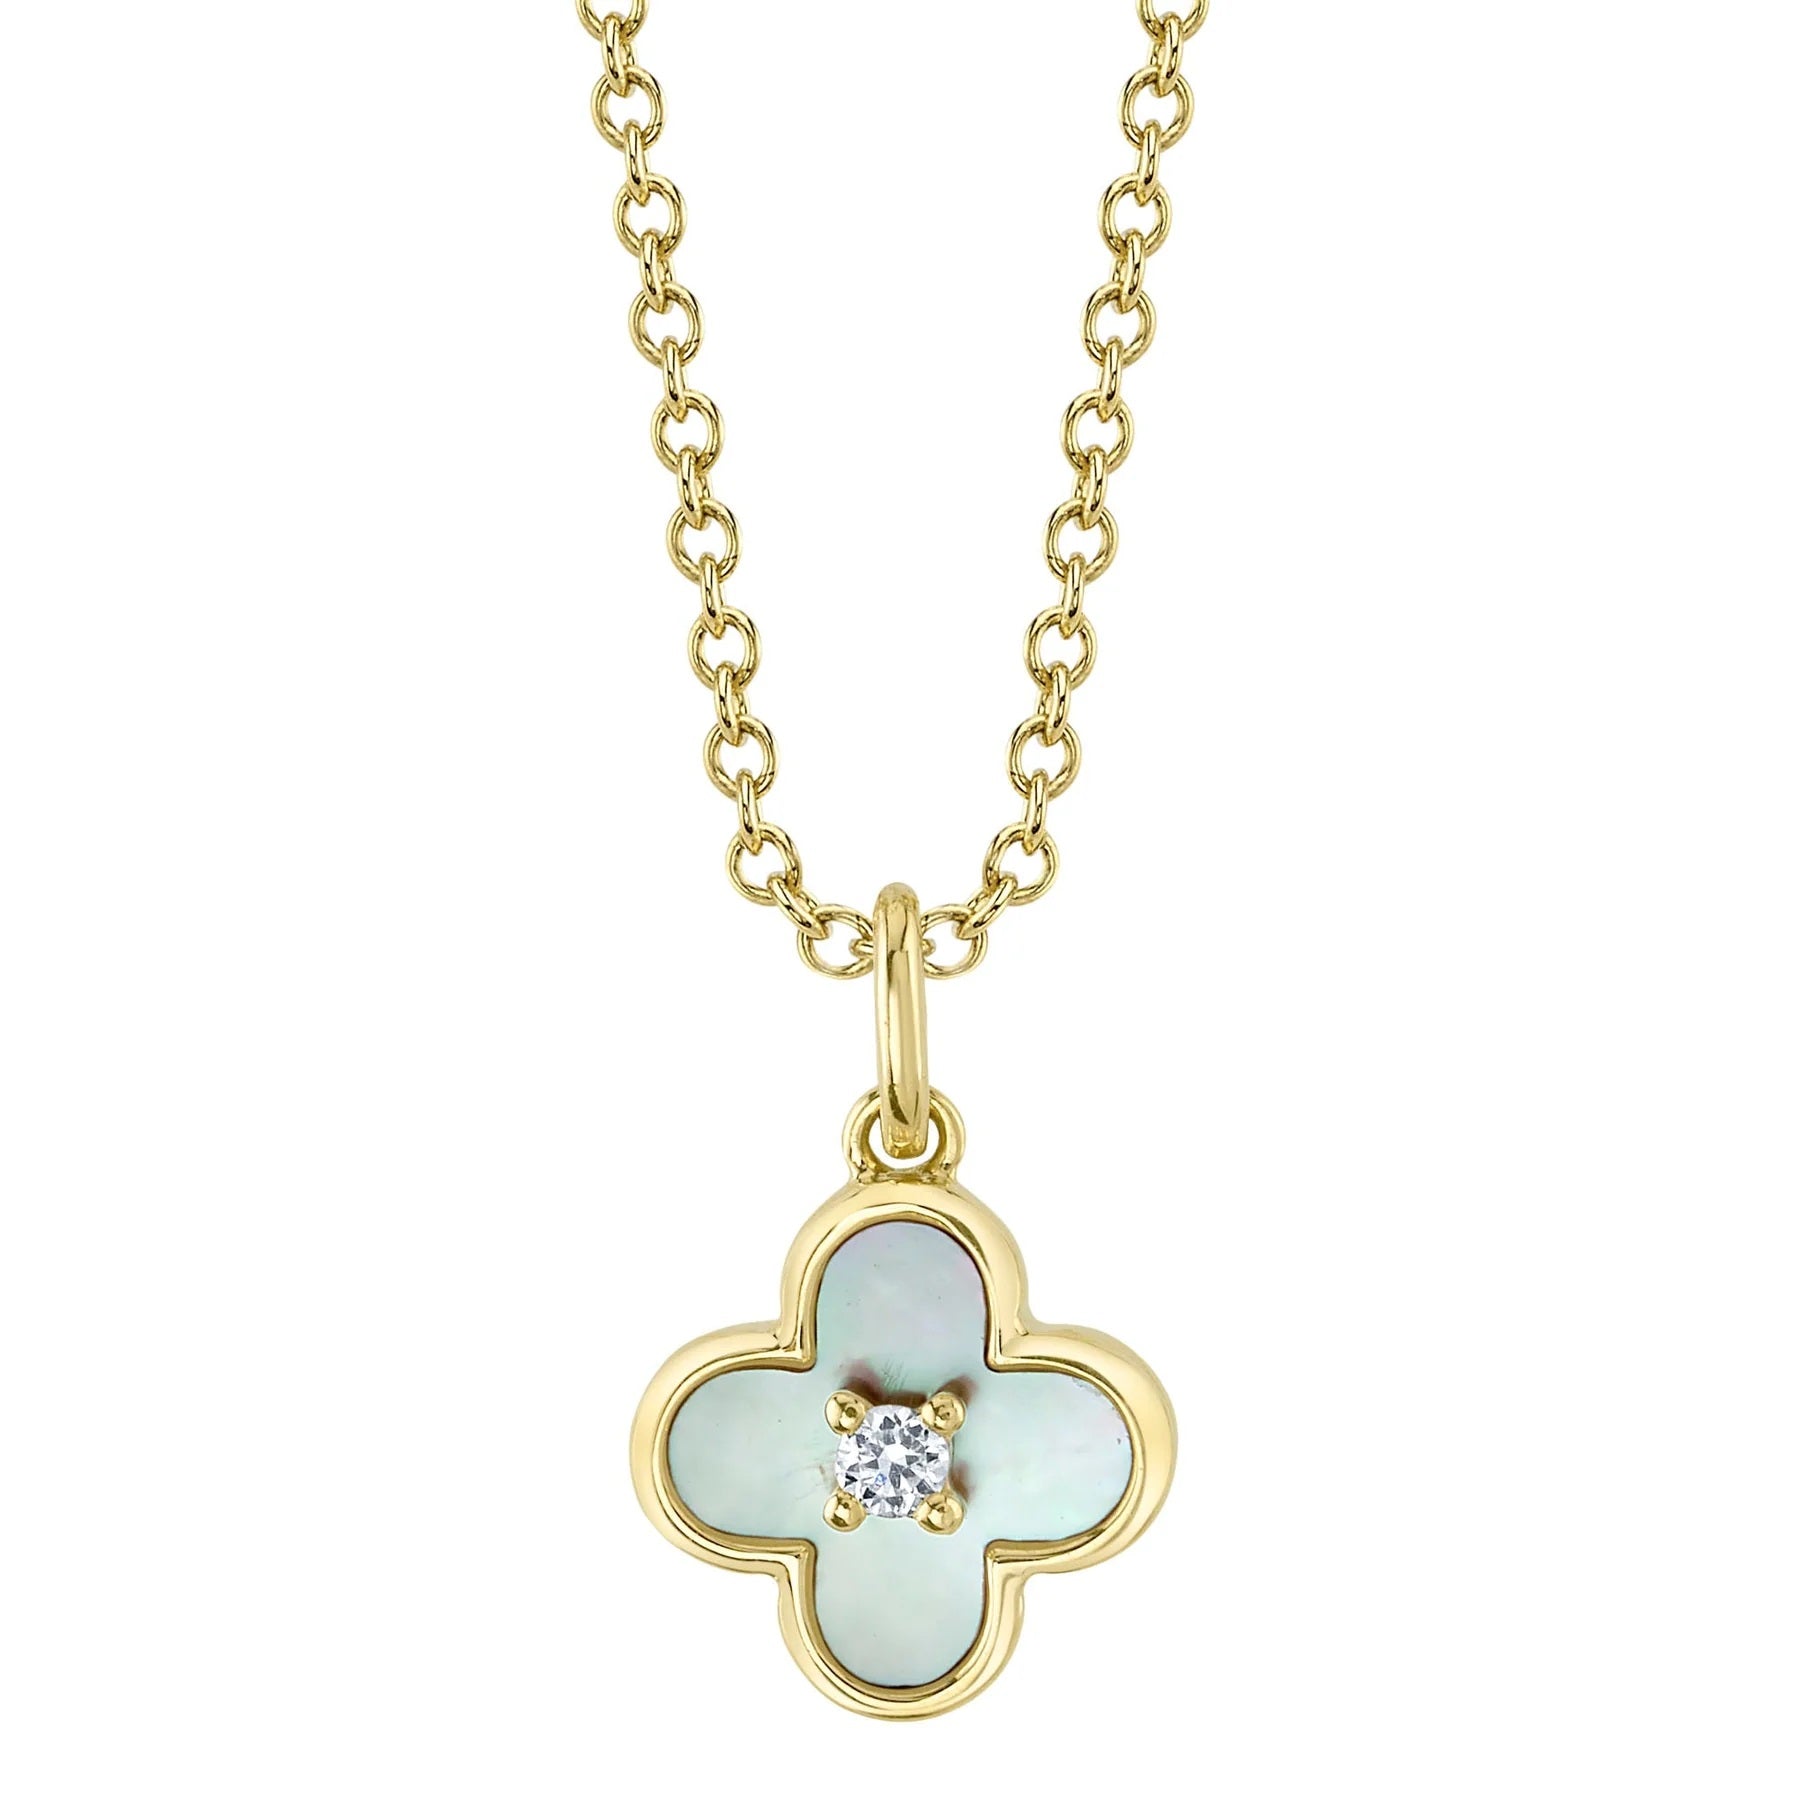 14K YELLOW GOLD MOTHER OF PEARL NECKLACE WITH DIAMOND